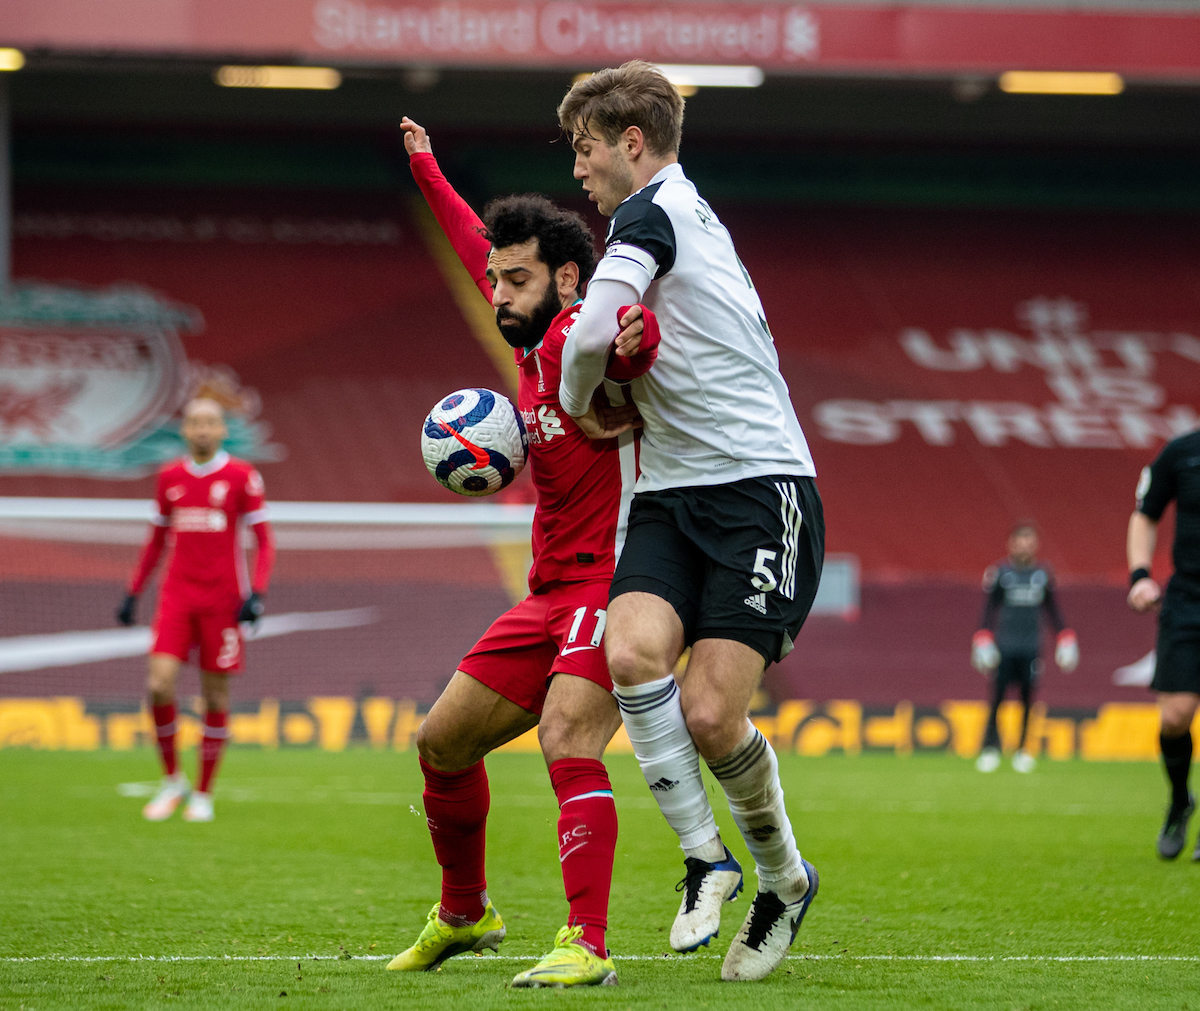 Liverpool's Mohamed Salah battles with Fulham's Joachim Andersen during the Premier League match